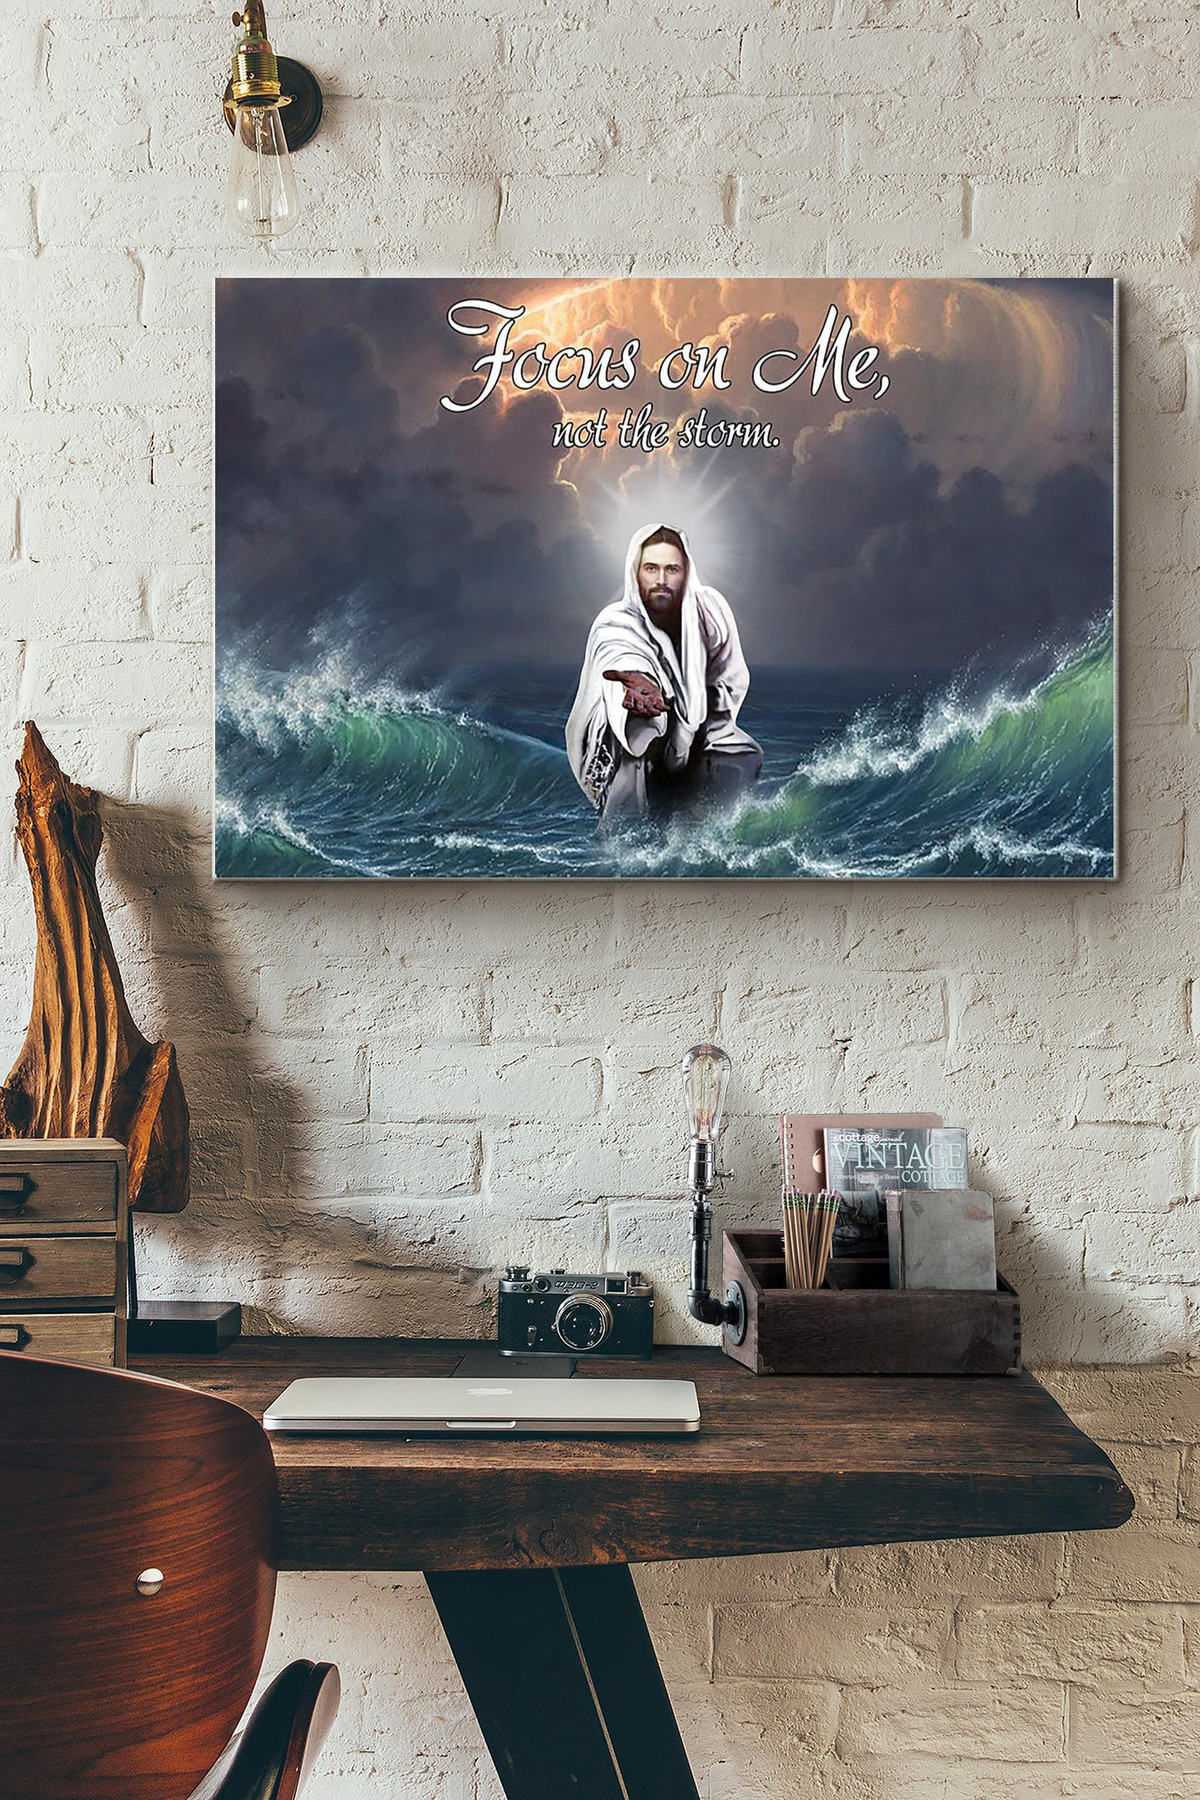 Jesus Focus On Me Not The Storm Christian Canvas Painting Ideas, Canvas Hanging Prints, Gift Idea Framed Prints, Canvas Paintings Wrapped Canvas 8x10